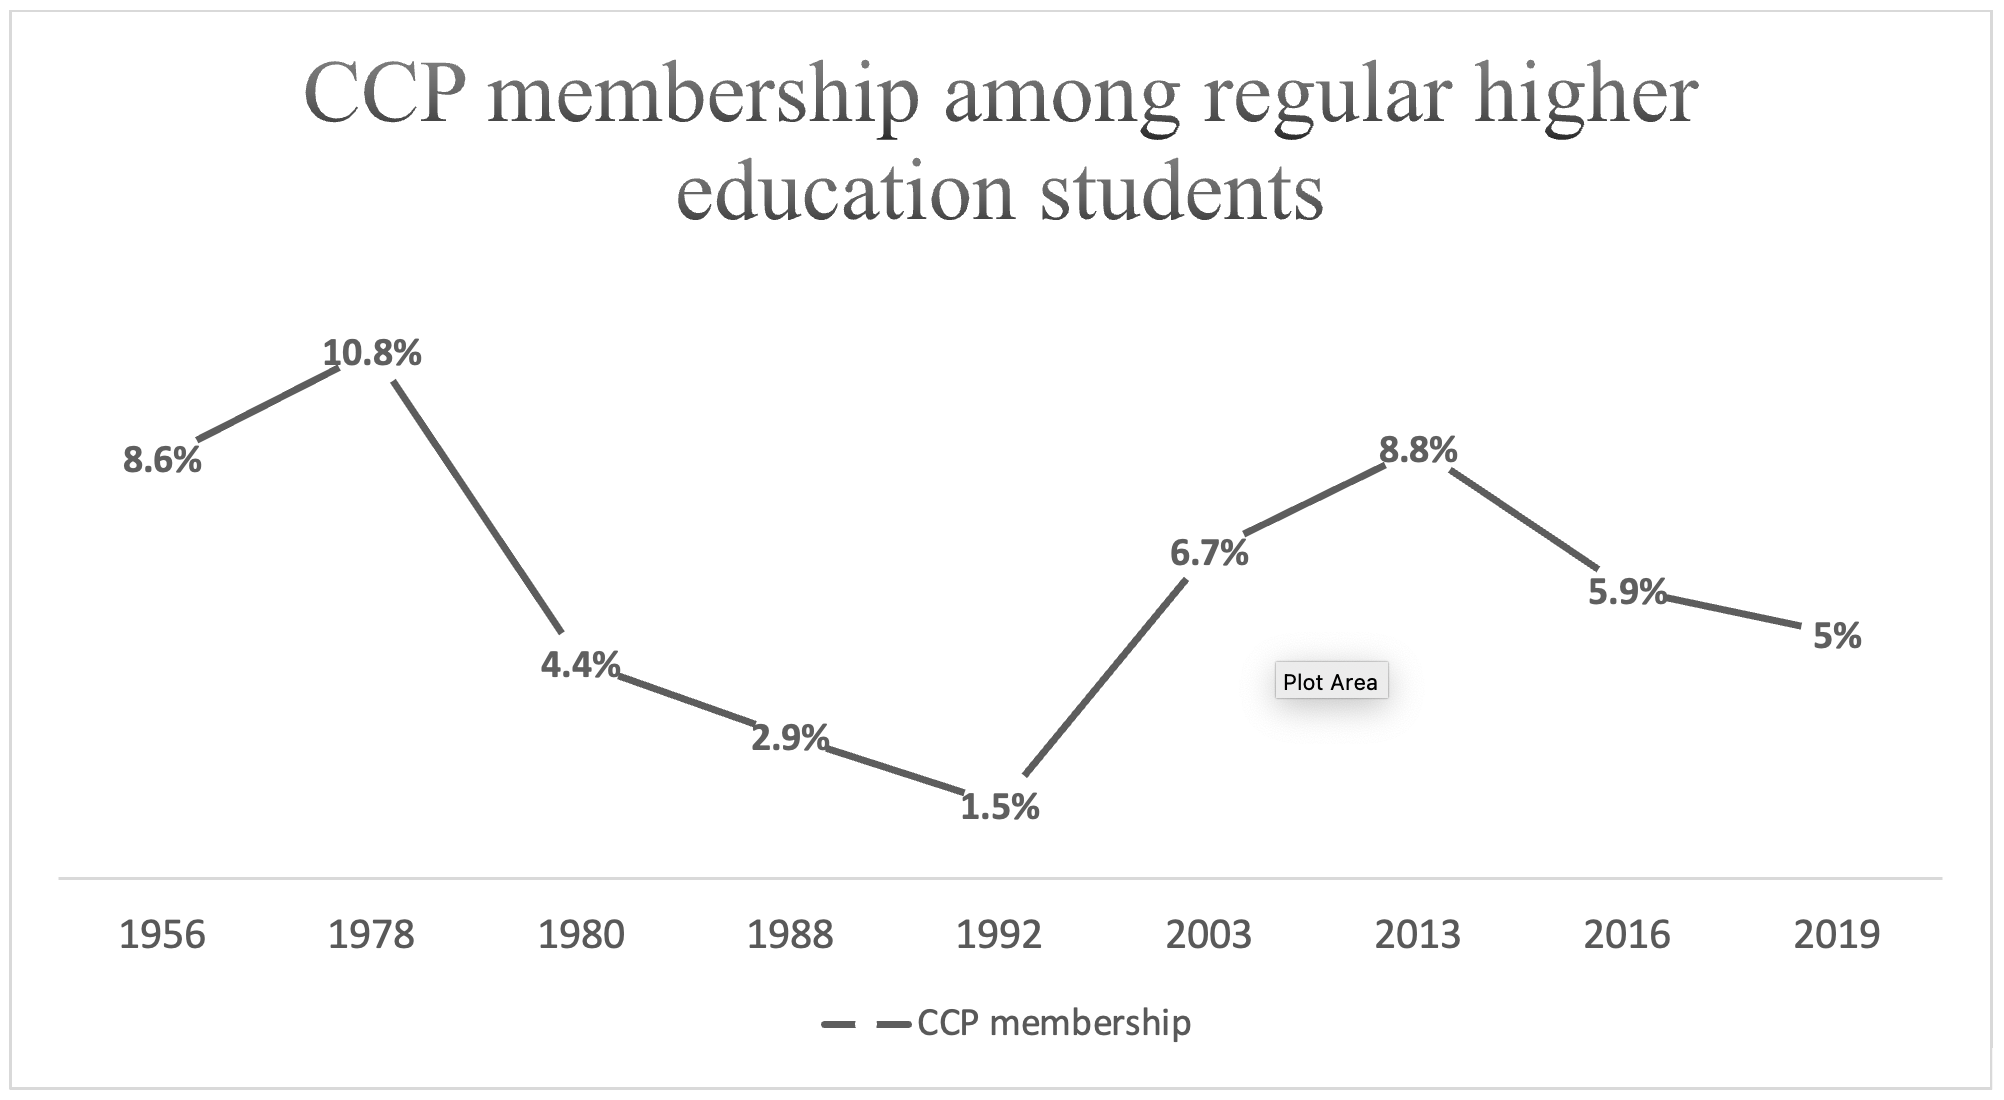 Chart shows CCP membership among regular high school educated students peak in 1978 and then drop to 1.5% in 1992. Membership climbs again to 8.8% in 2013 and then back down to 5% in 2019.